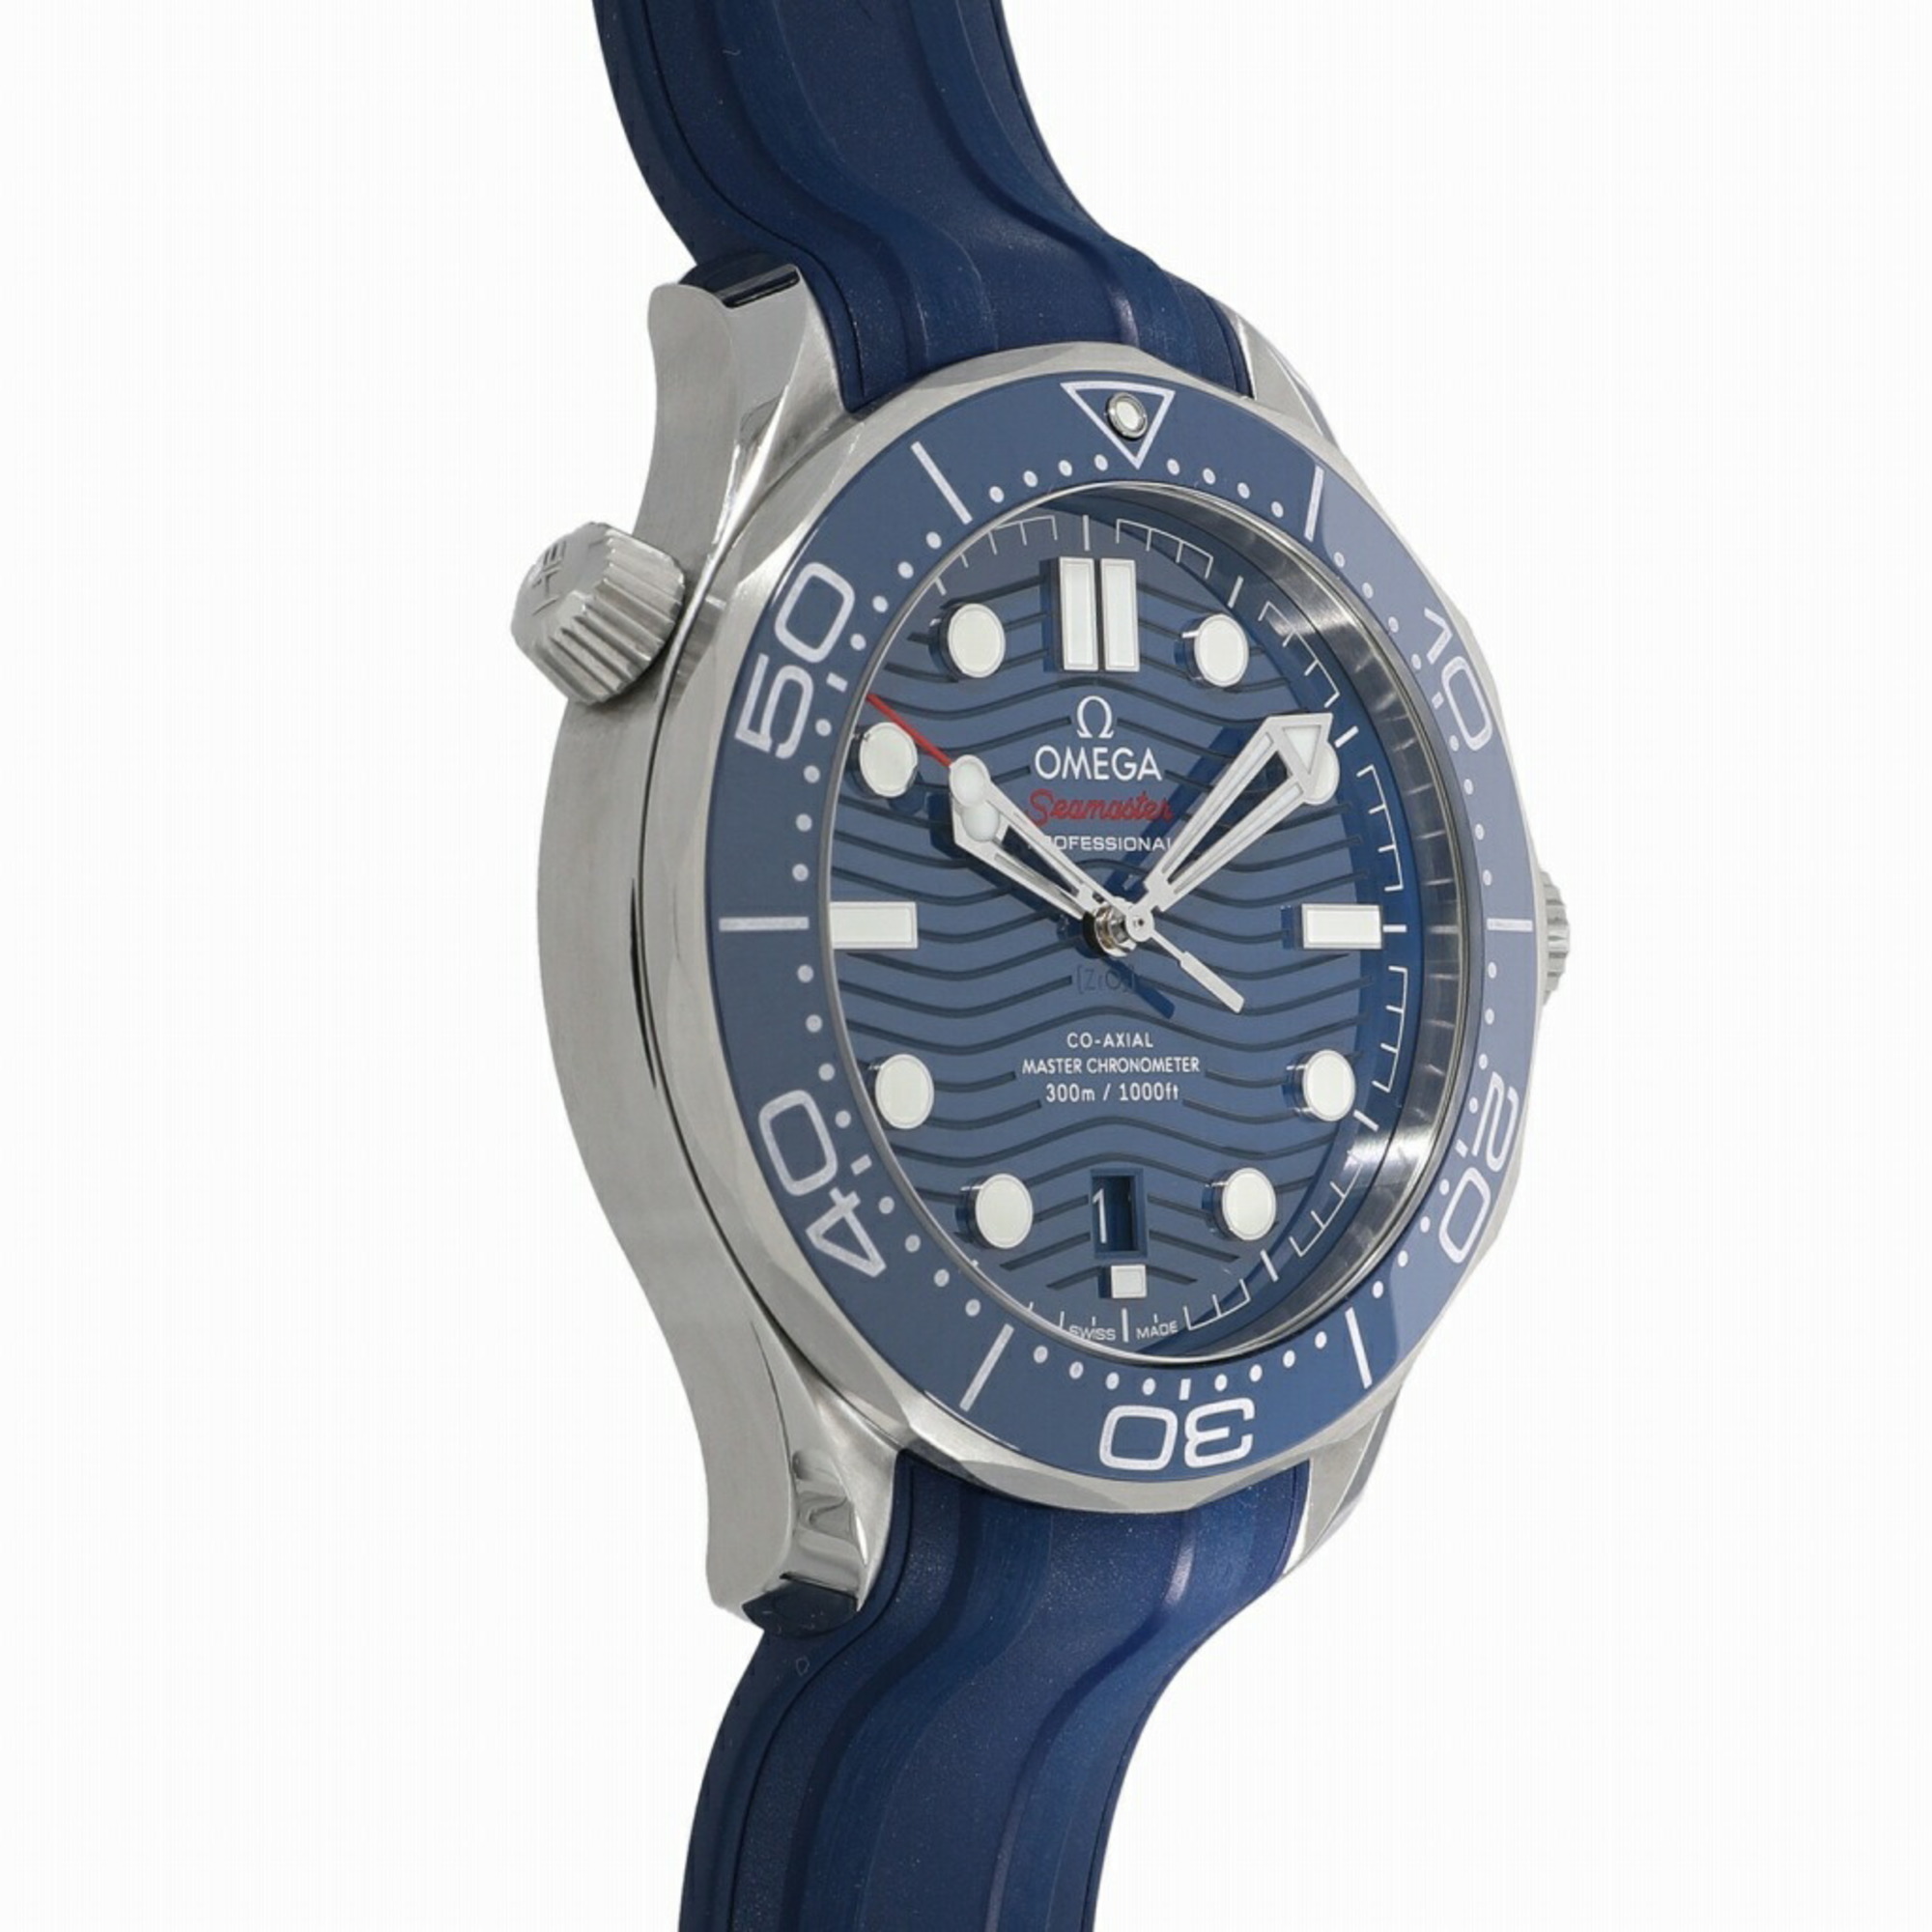 Omega Seamaster Diver 300m Master Co-Axial Chronometer 42mm 210.32.42.20.03.001 Blue Men's Watch